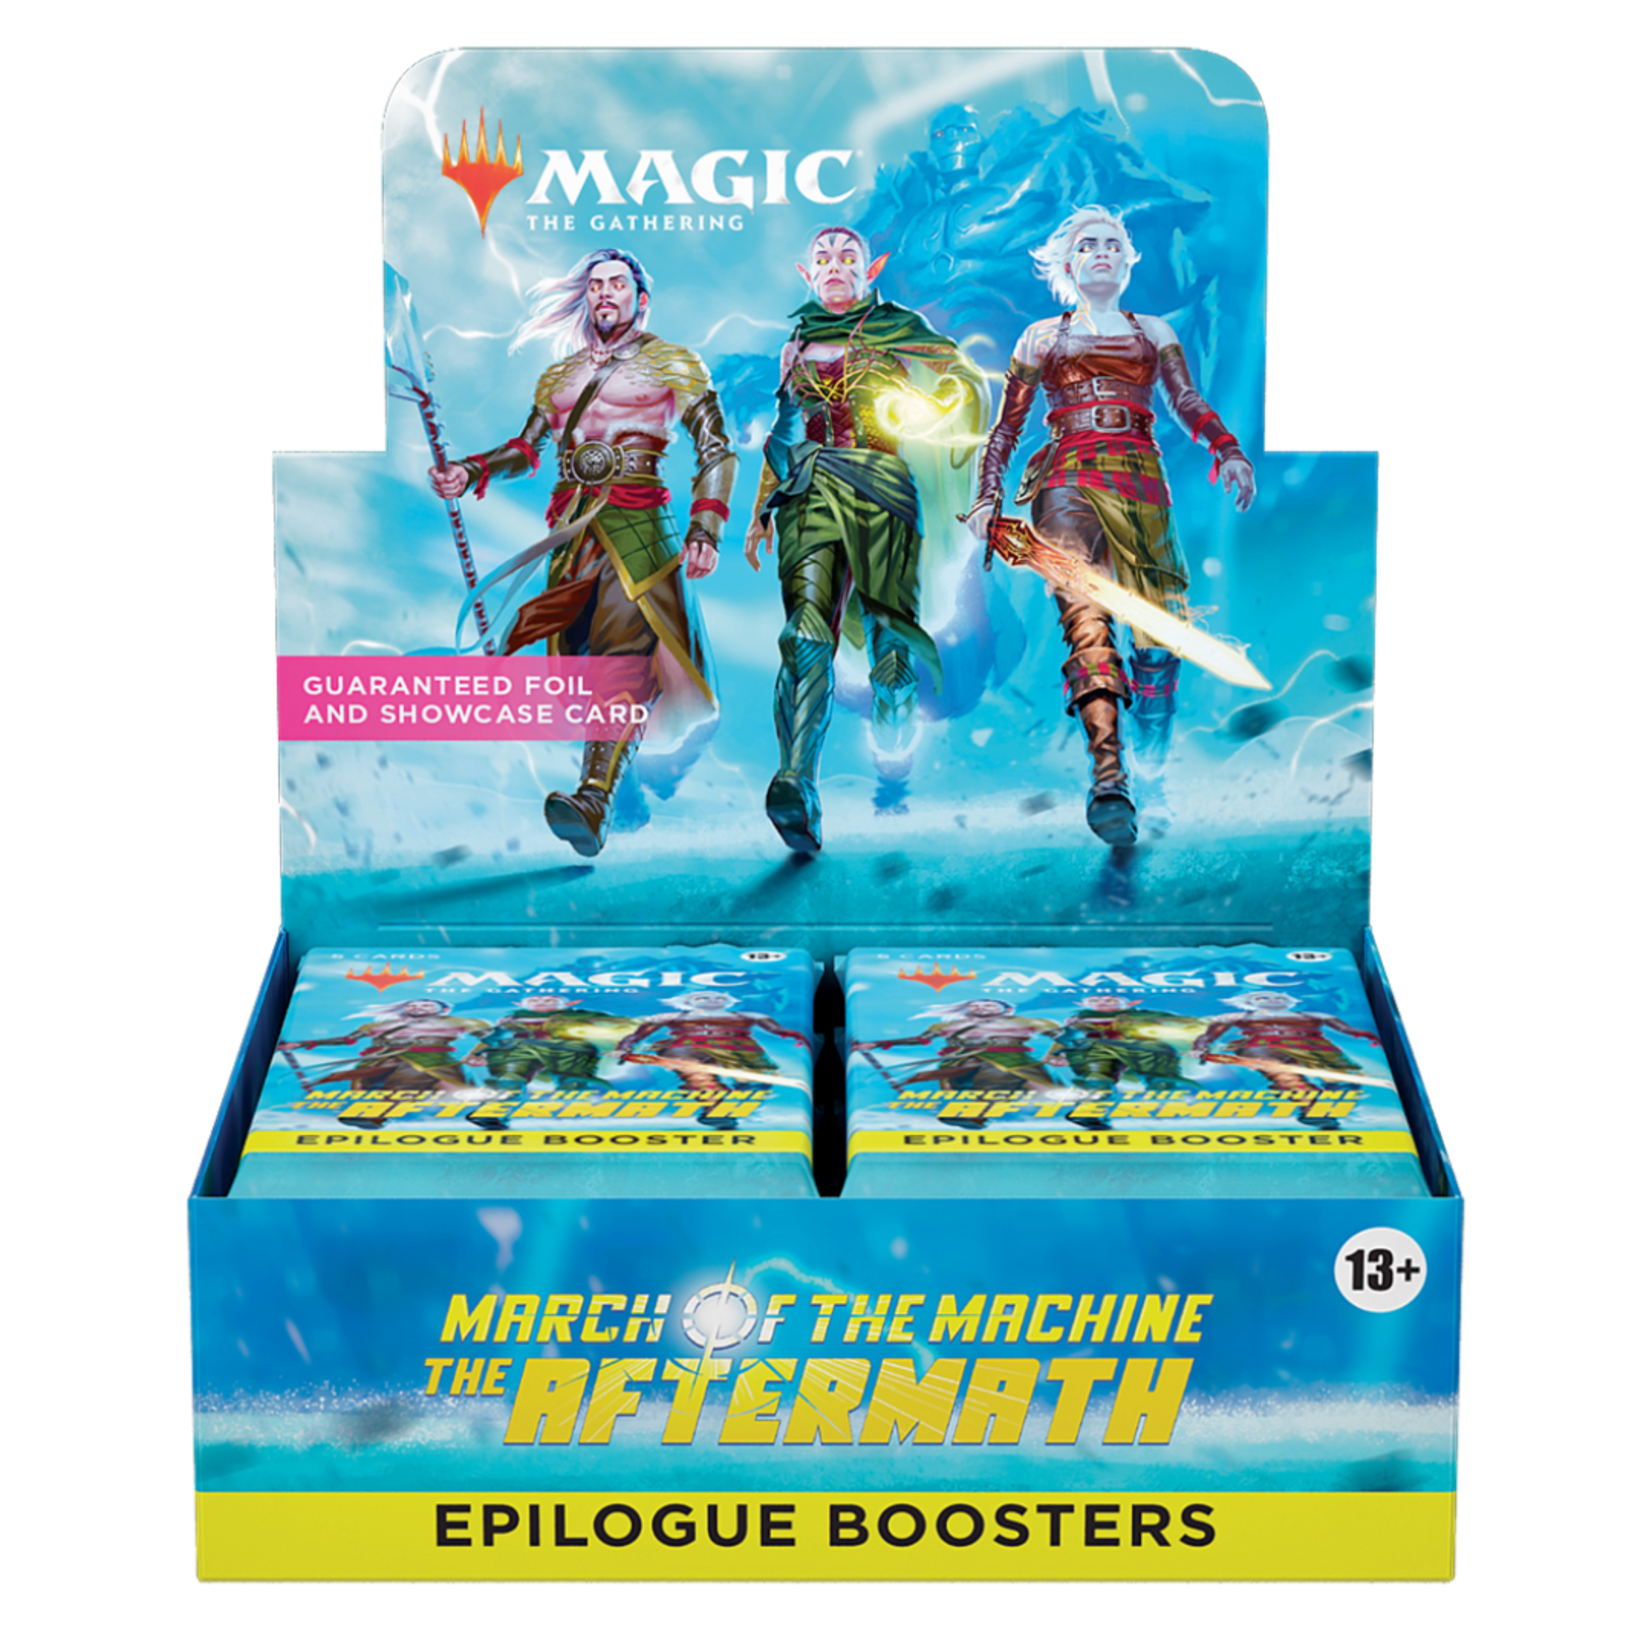 March of the Machine - Aftermath - Epilogue Booster Box